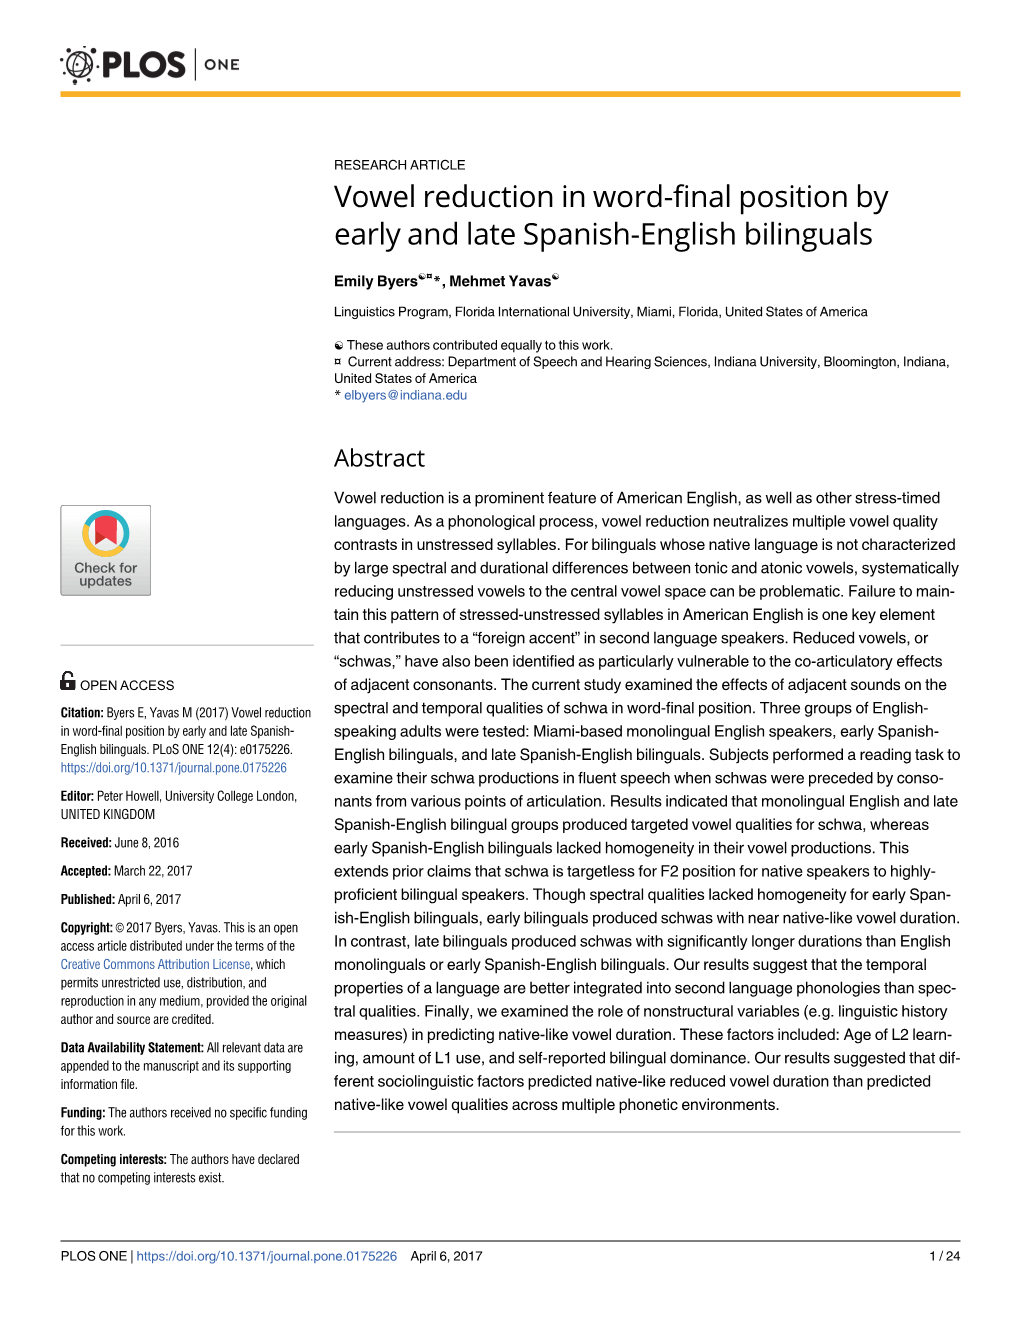 Vowel Reduction in Word-Final Position by Early and Late Spanish-English Bilinguals